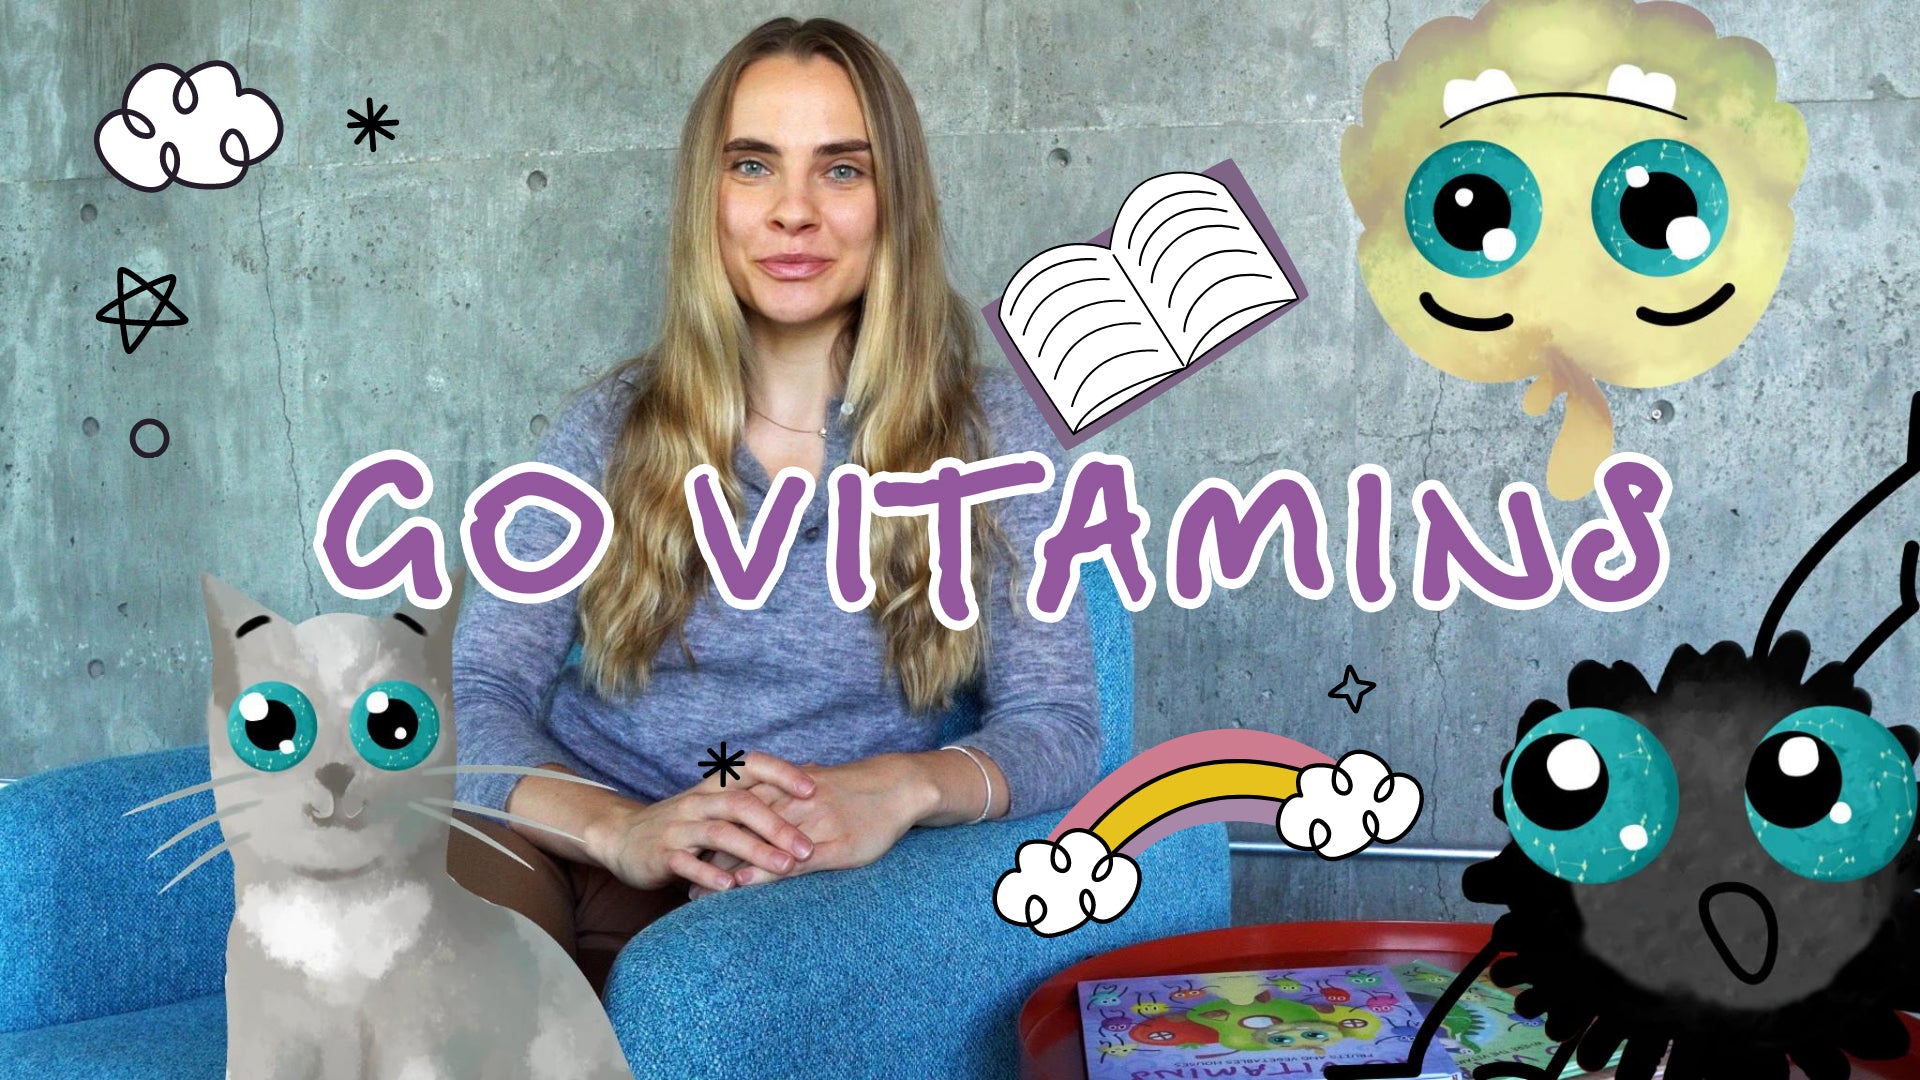 Load video: Go Vitamins stories hekp kids learn about healthy food, answer many questions. With the help of Lookie, readers travel  in the world of vitamins and minerals, learning all they can about different fruits, vegetables and berries!